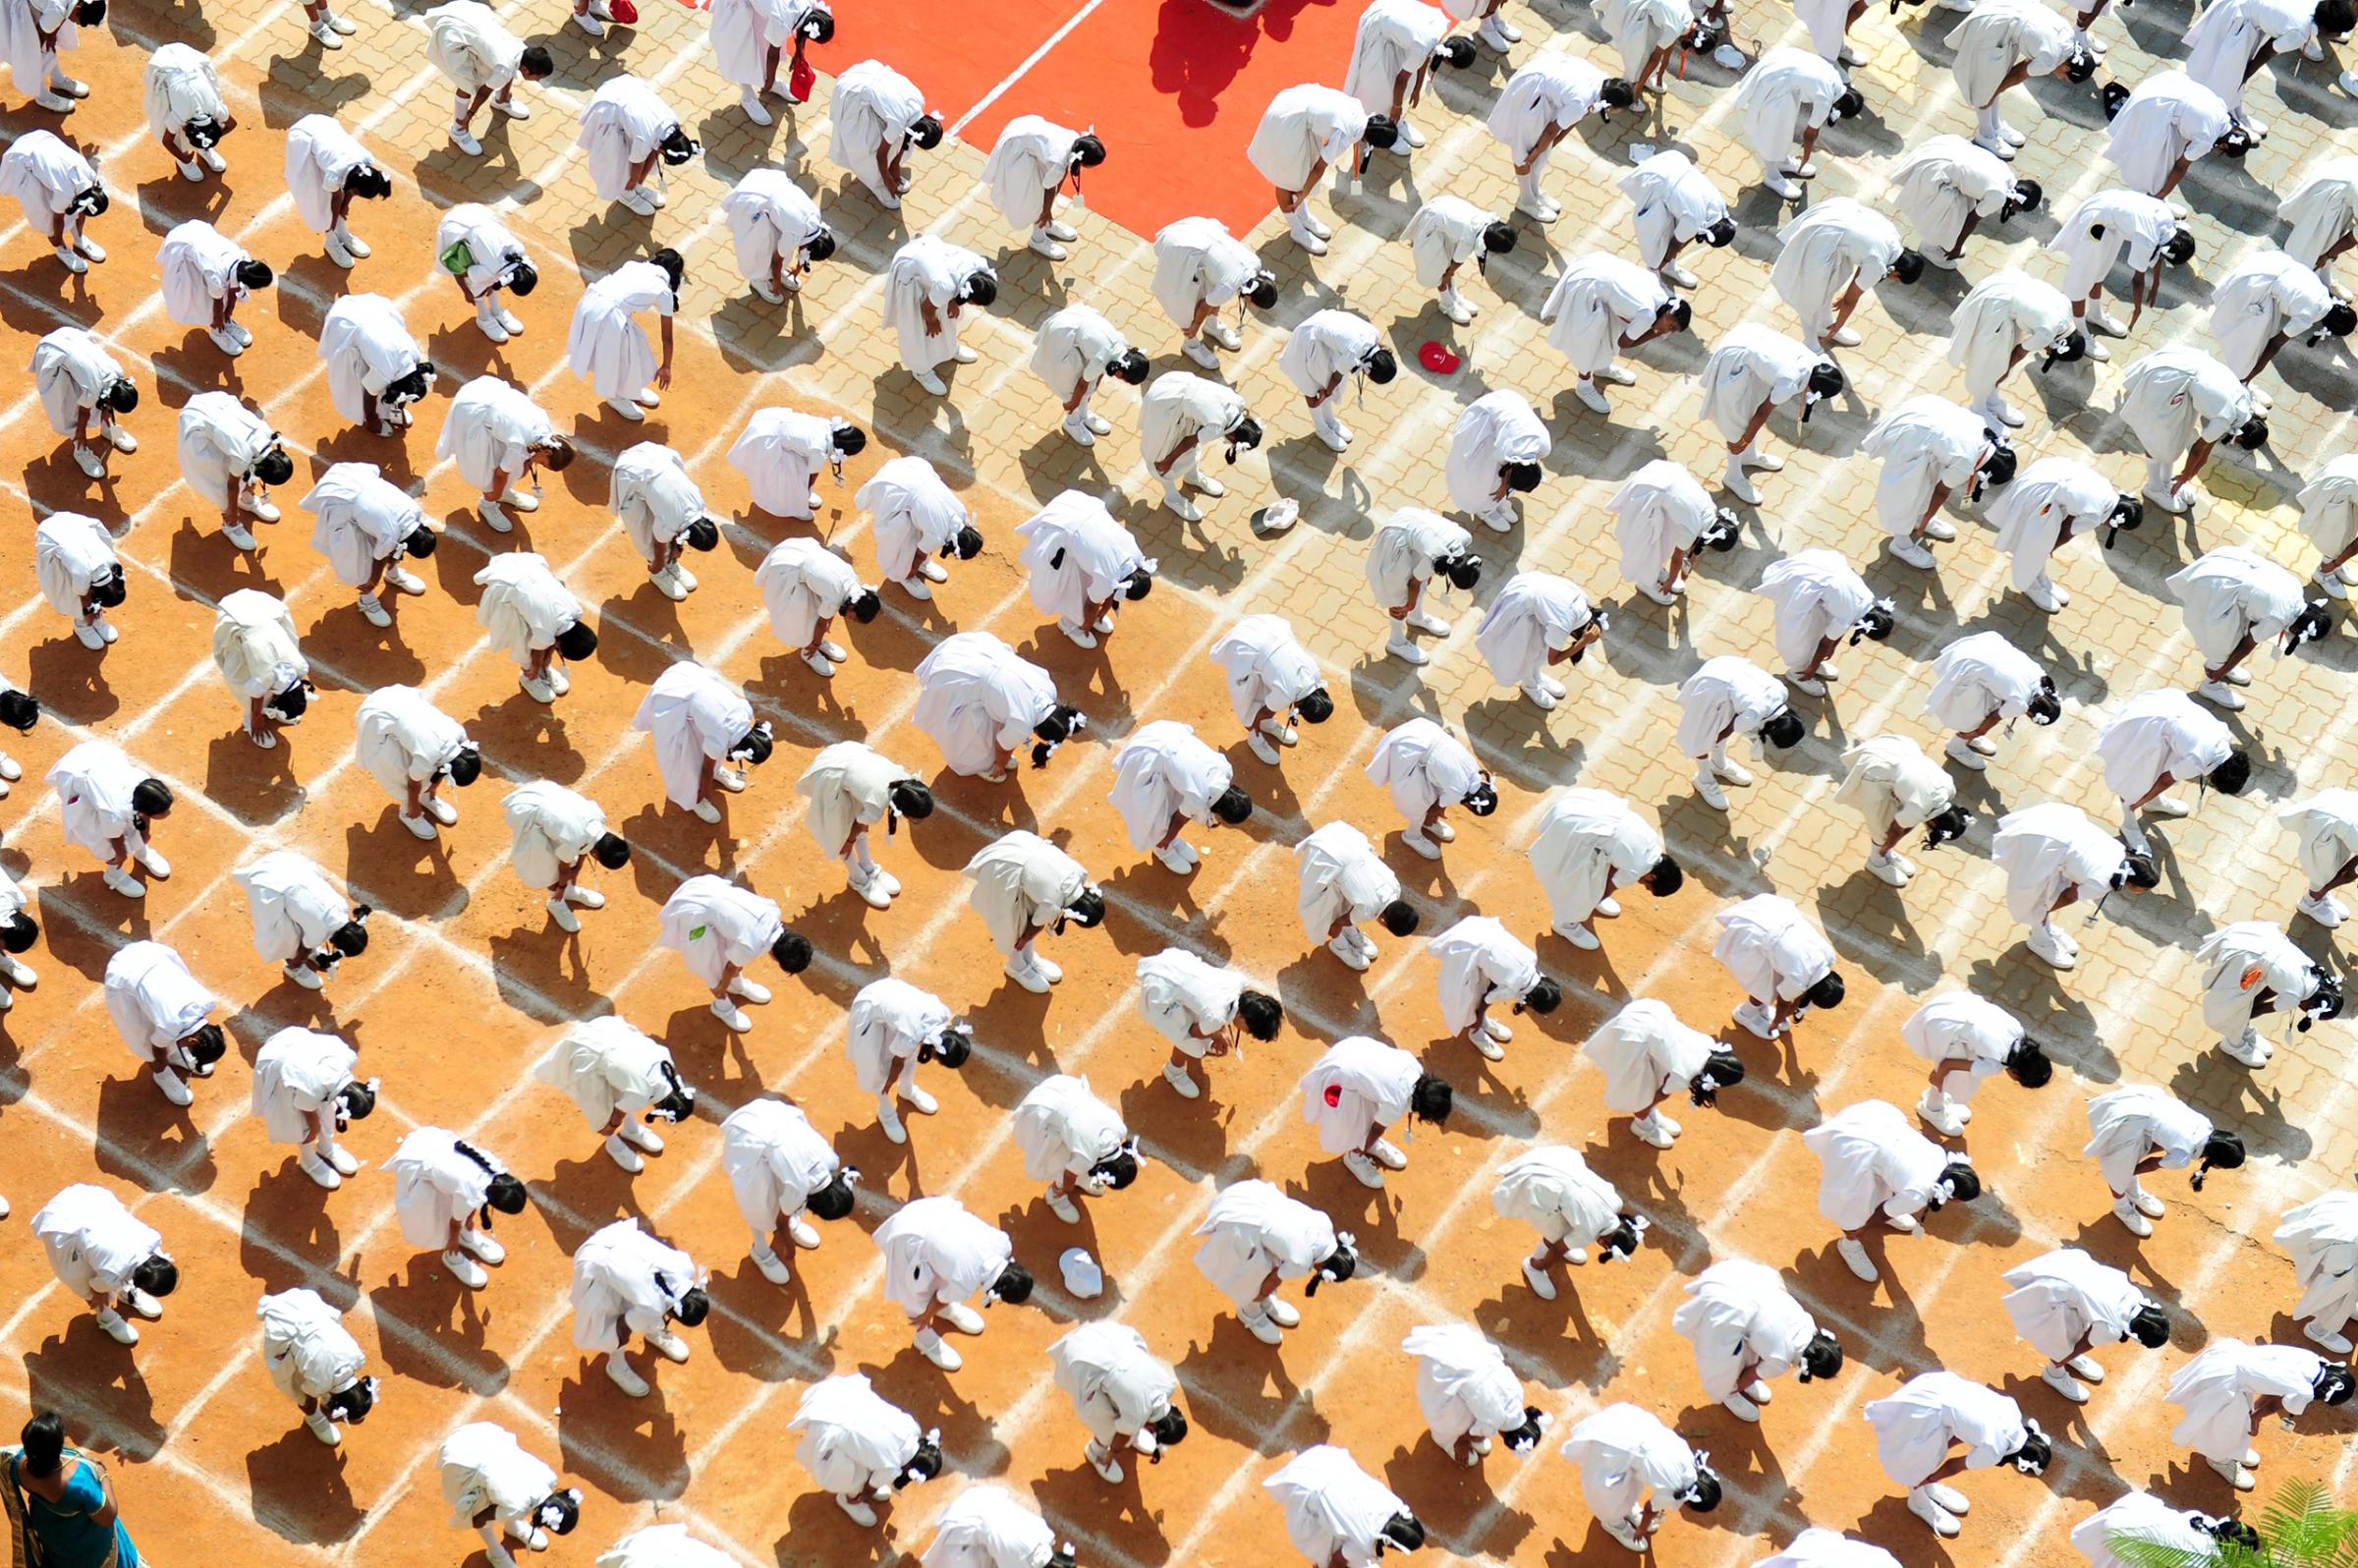 4001 Indian schoolchildren participate in a yoga session on the eve of International Yoga Day at a school in Chennai, India, on June 20, 2016.